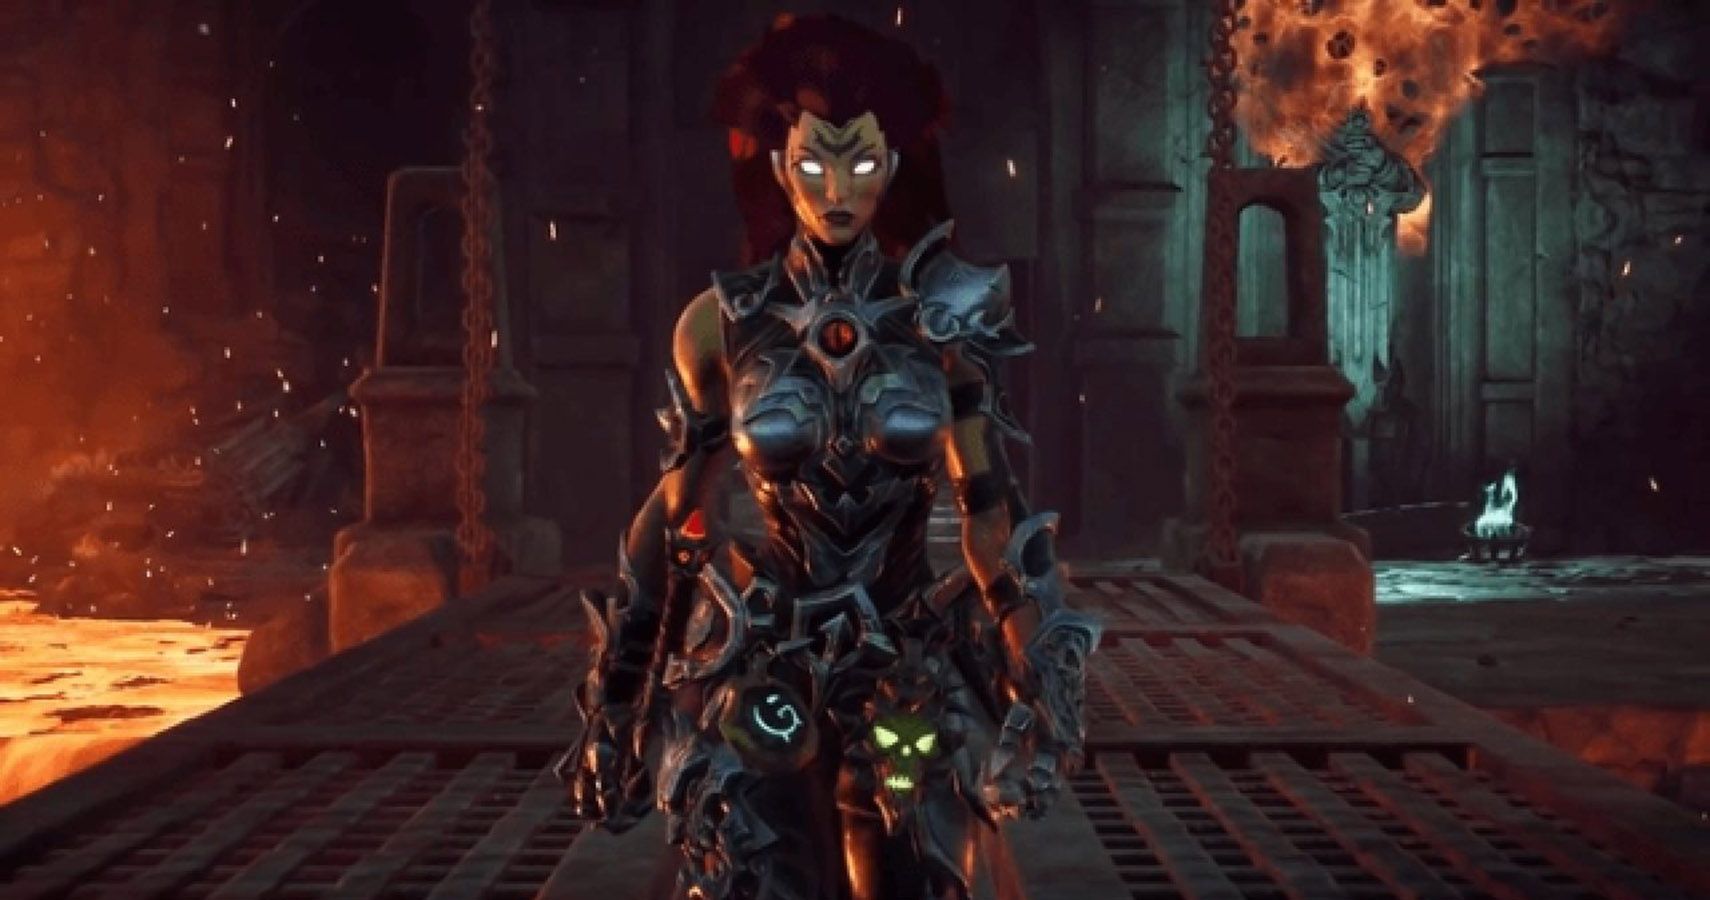 How To Get The Abyssal Armor In Darksiders 3 Thegamer